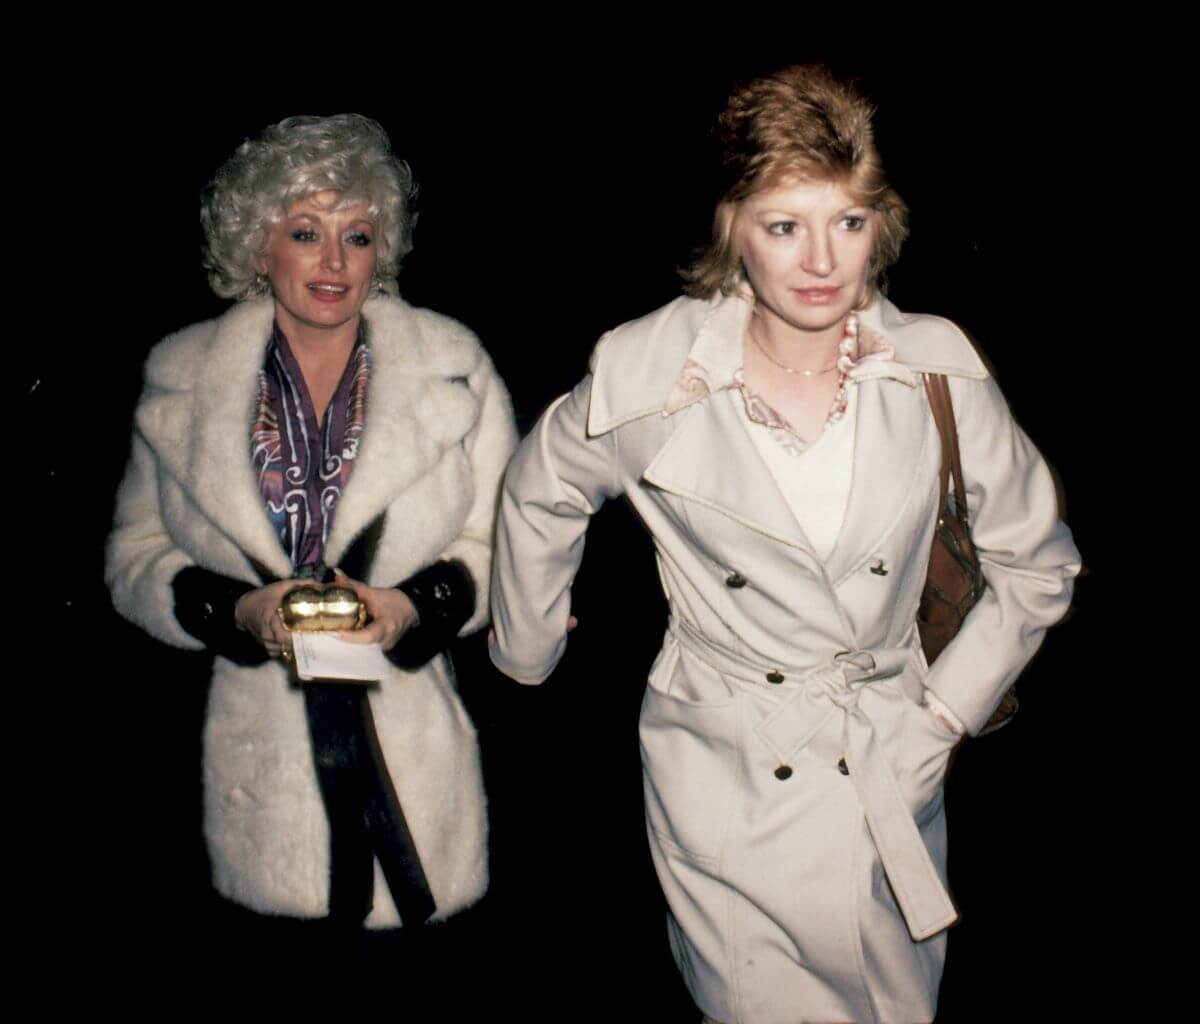 Dolly Parton and her best friend Judy Ogle walk outside together. They both wear coats.